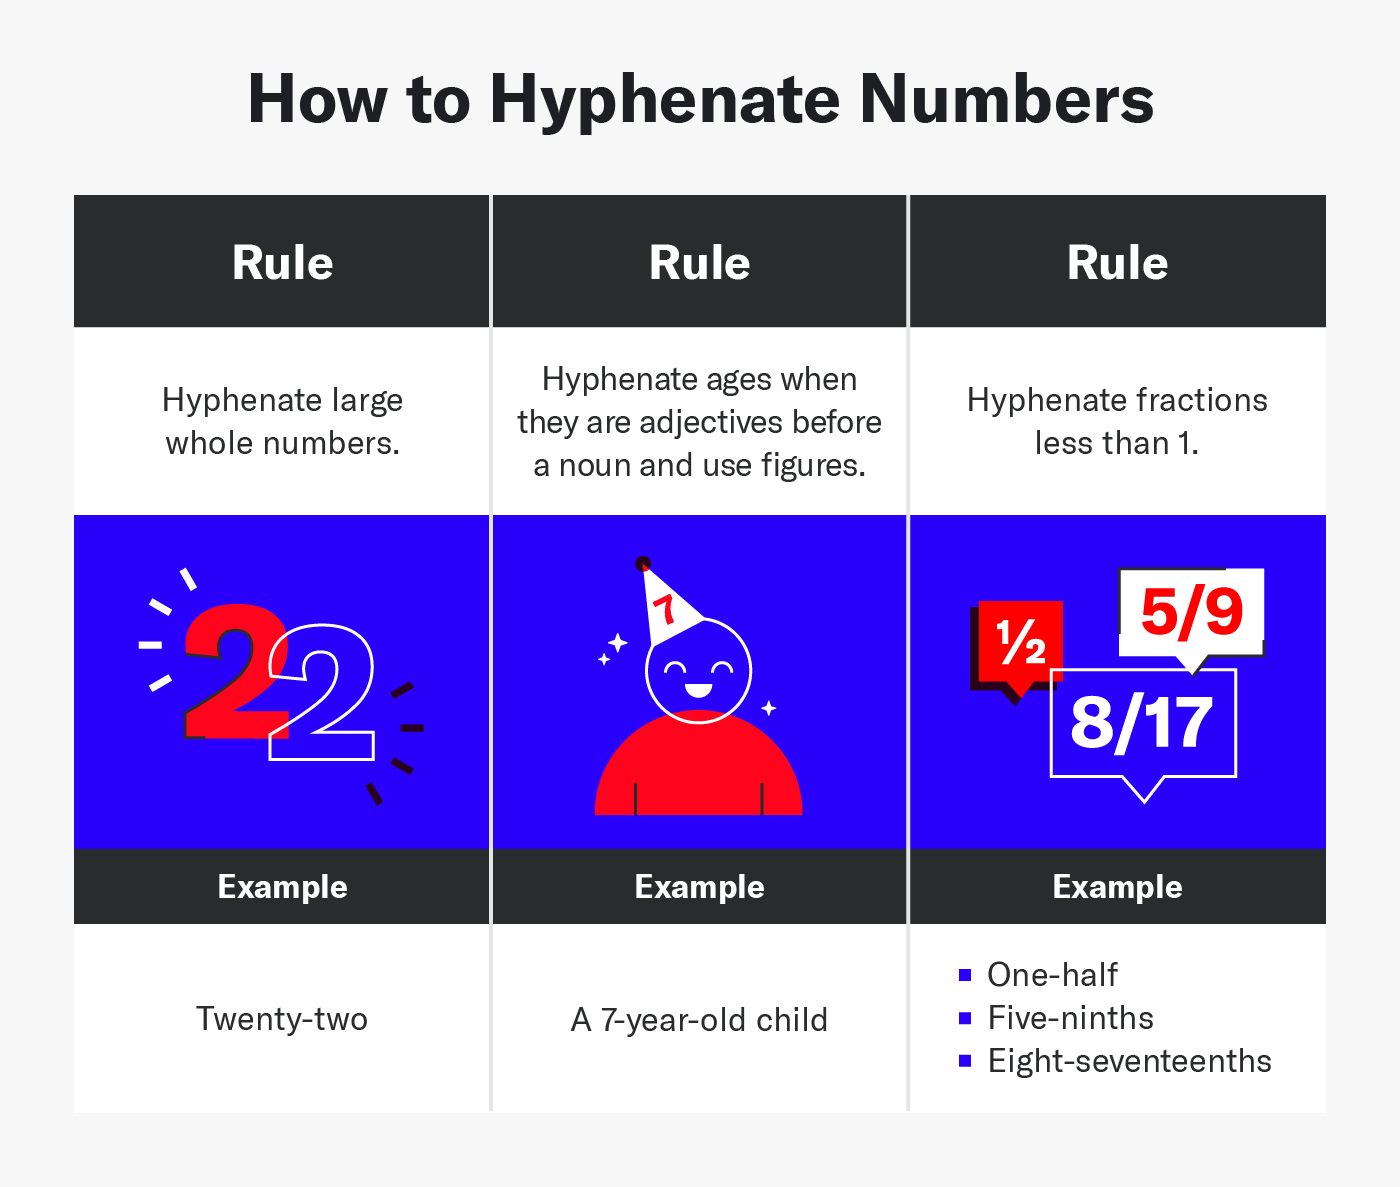 A guide showing how to hyphenate numbers and number hyphenation rules.